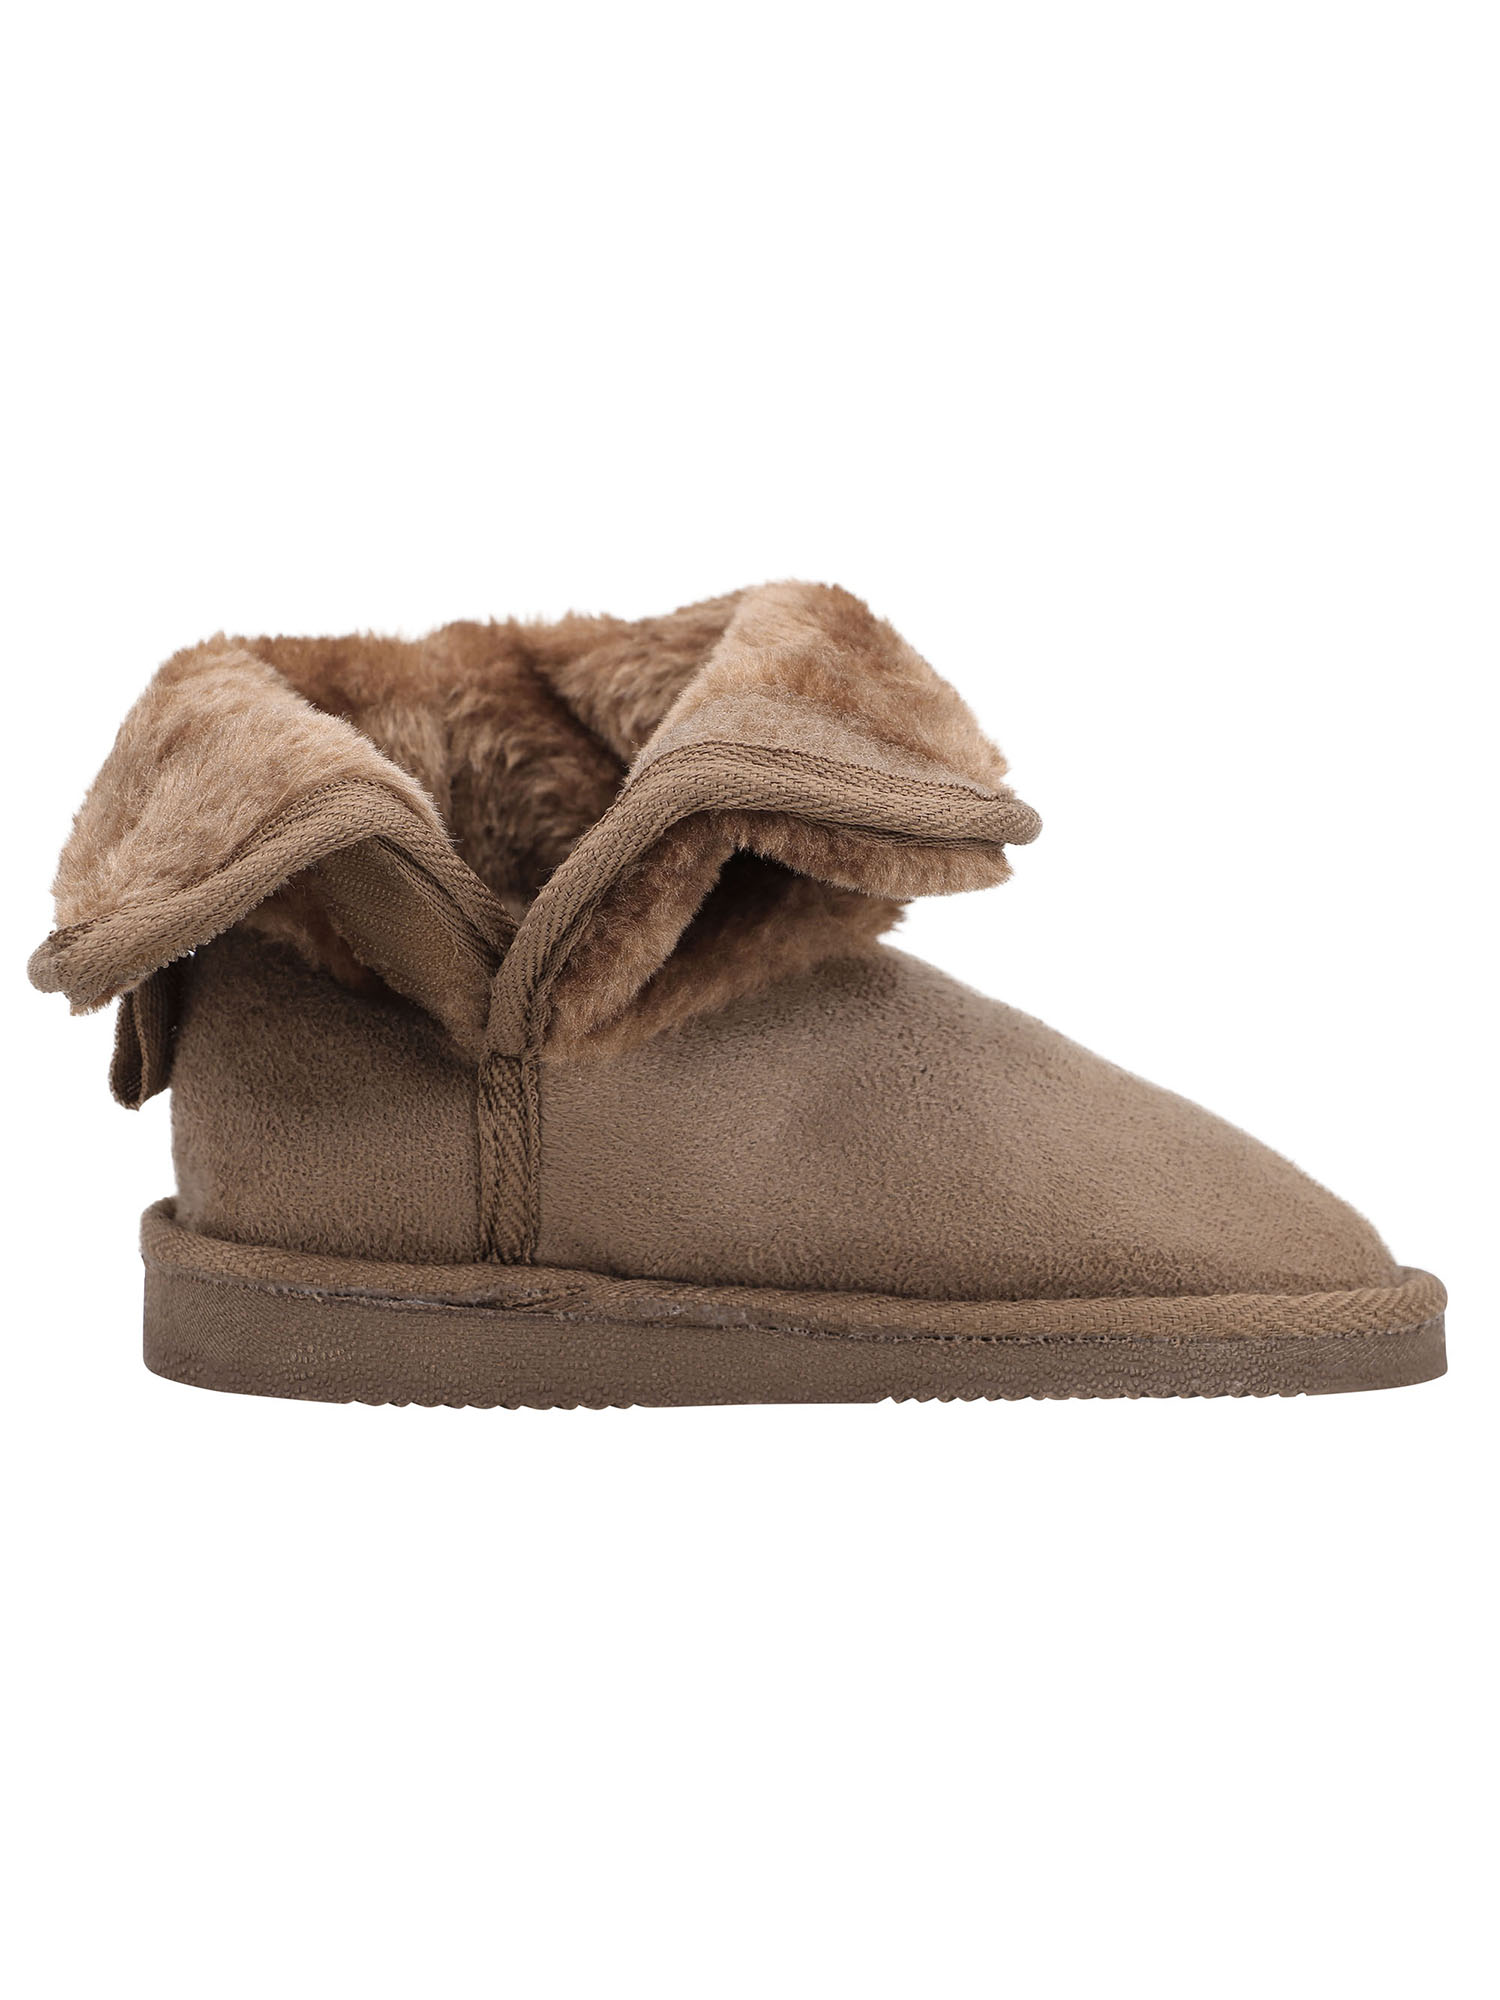 Compatible for Kids Snow Boots Sherpa Lined Winter Boots Camel 12 - image 3 of 3